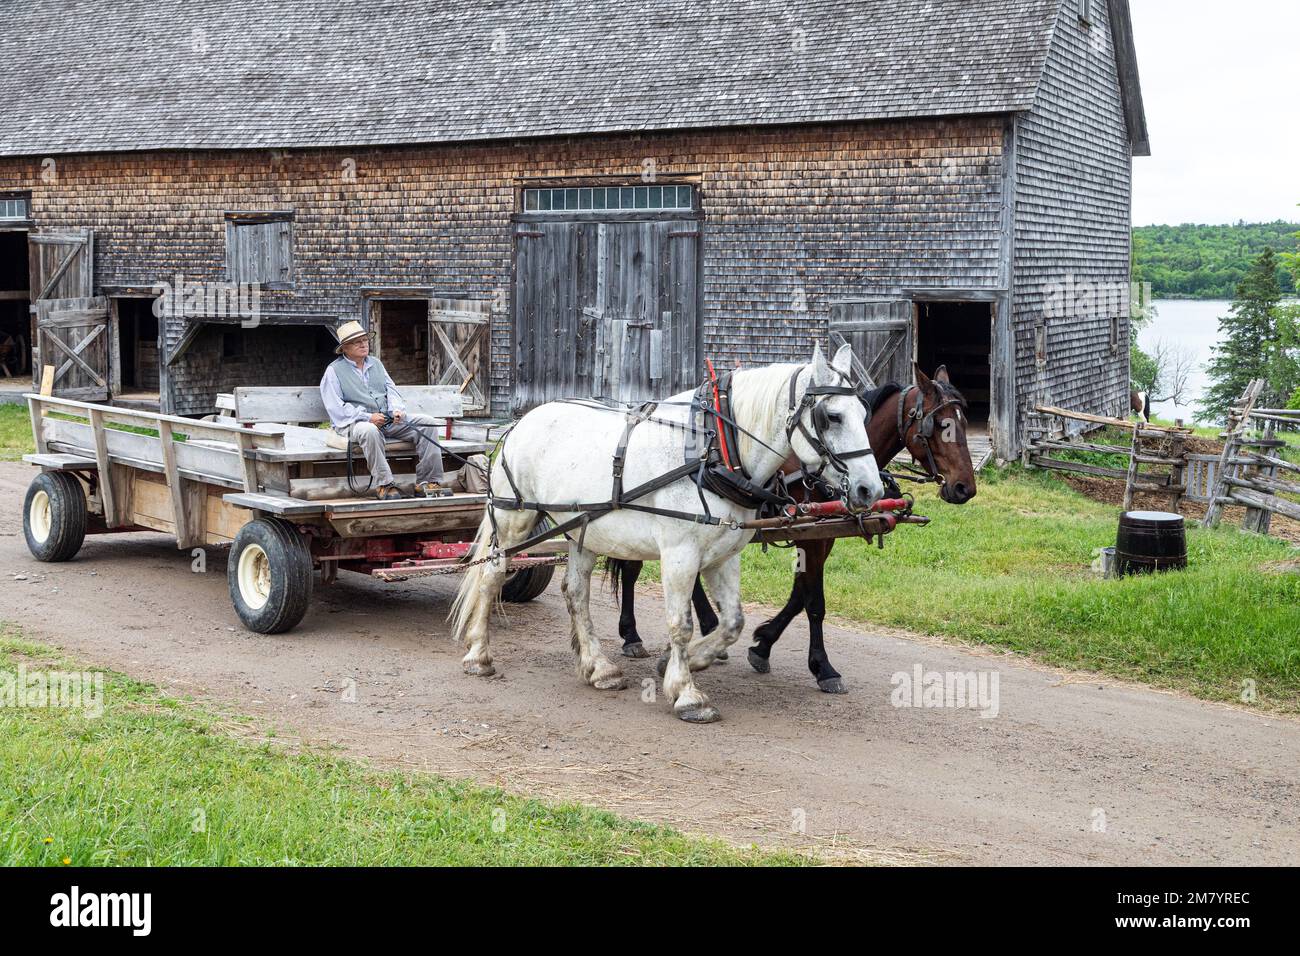 PERIOD HORSE HARNESSING FOR FARM WORK AND TRANSPORT, KINGS LANDING, HISTORIC ANGLOPHONE VILLAGE, PRINCE WILLIAM PARISH, FREDERICTON, NEW BRUNSWICK, CANADA, NORTH AMERICA Stock Photo